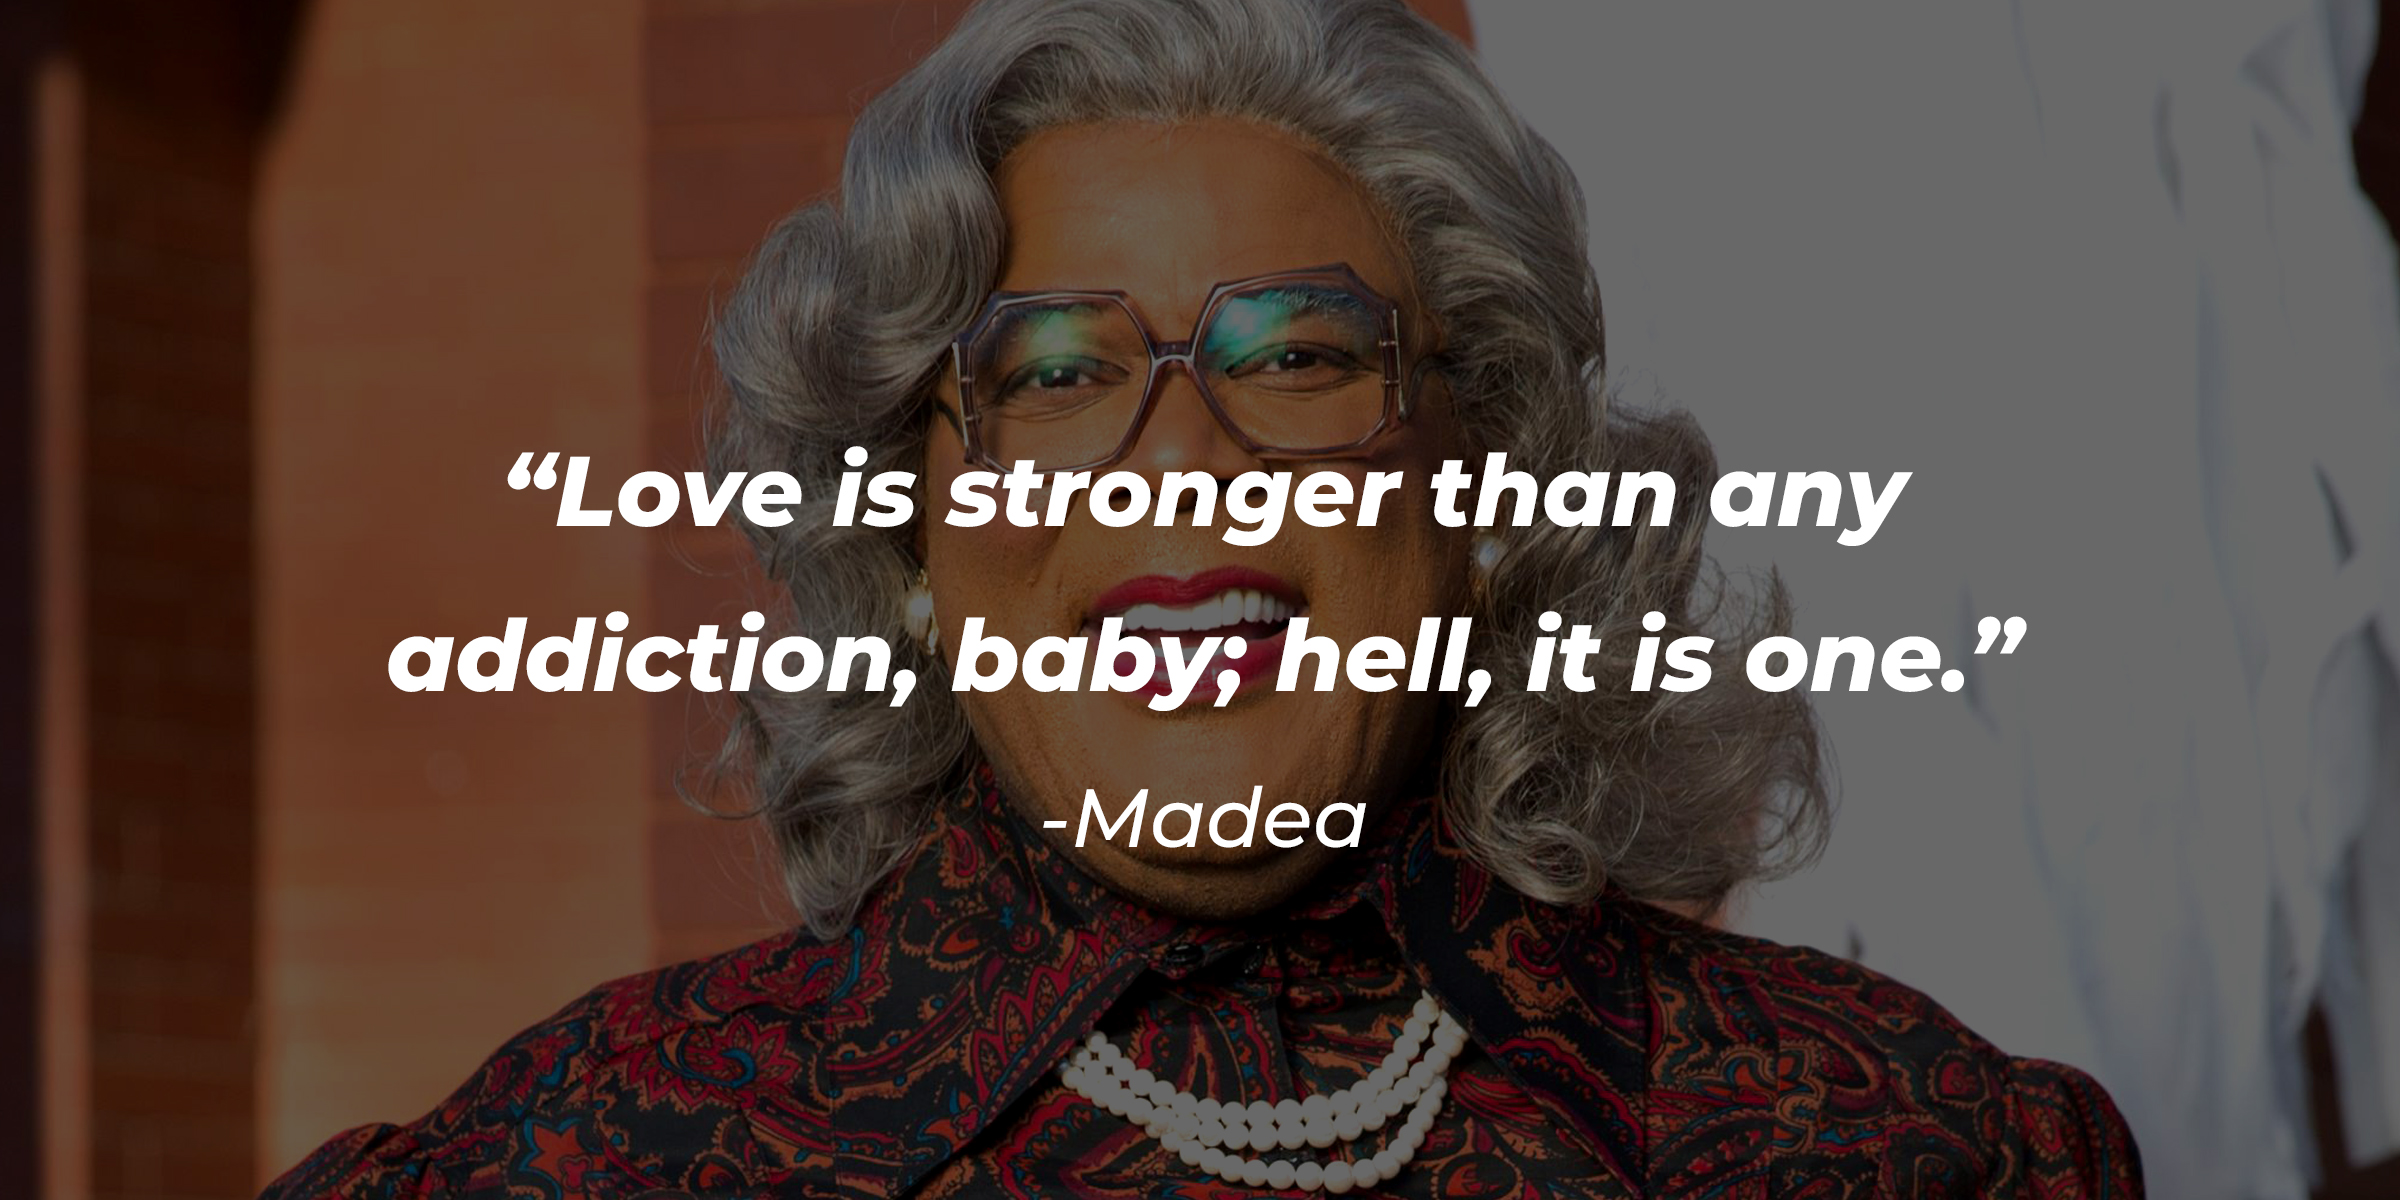 An image of Madea with her quote: “Love is stronger than any addiction, baby; hell, it is one.” | Source: Facebook.com/madea